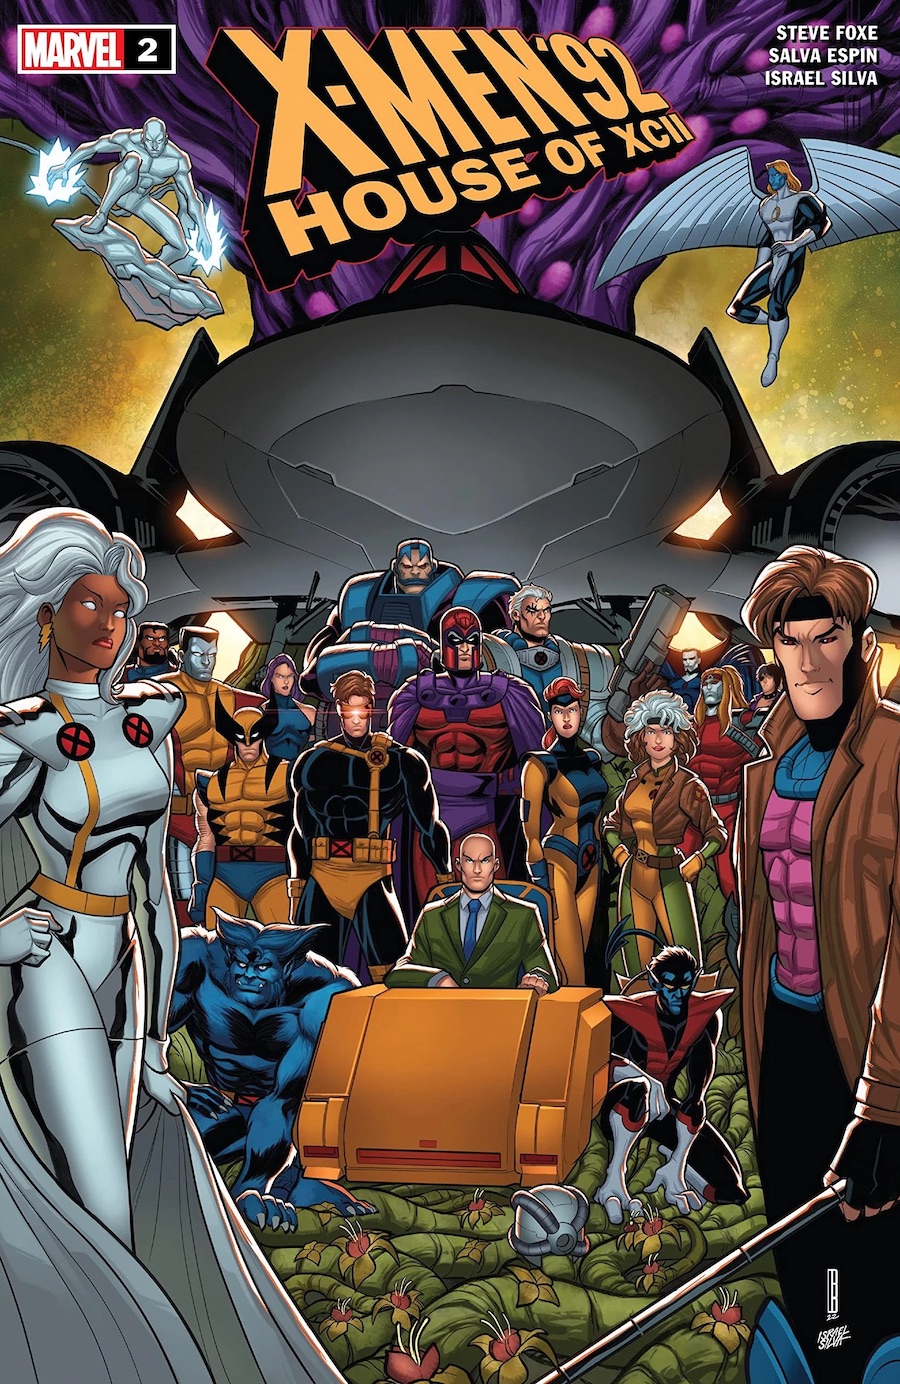 Marvel Preview: X-Men '92: House of XCII #2